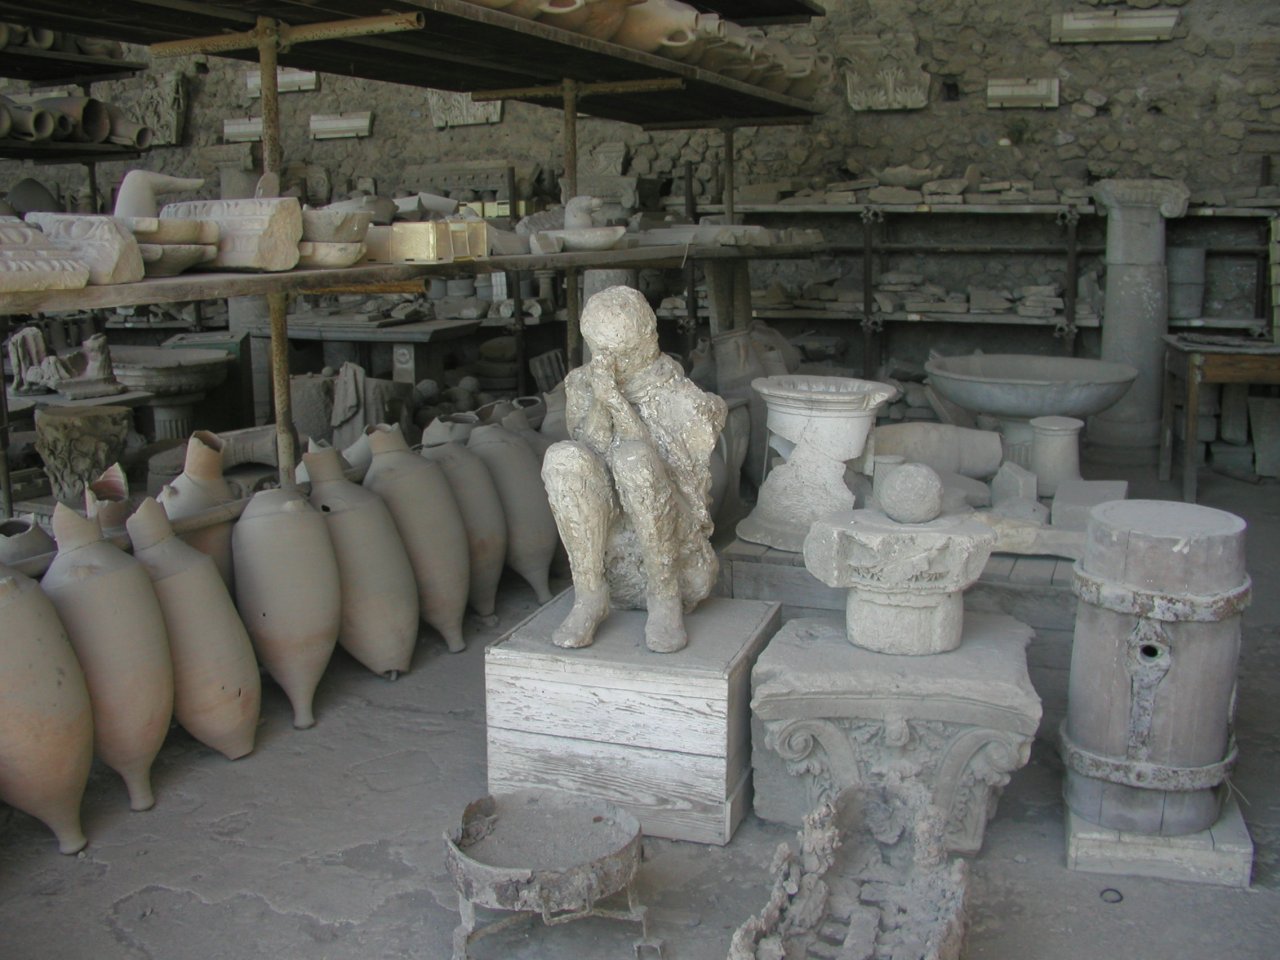 JPEG image - Pompei : we found the plaster casts of some of the victims very poignant. ...